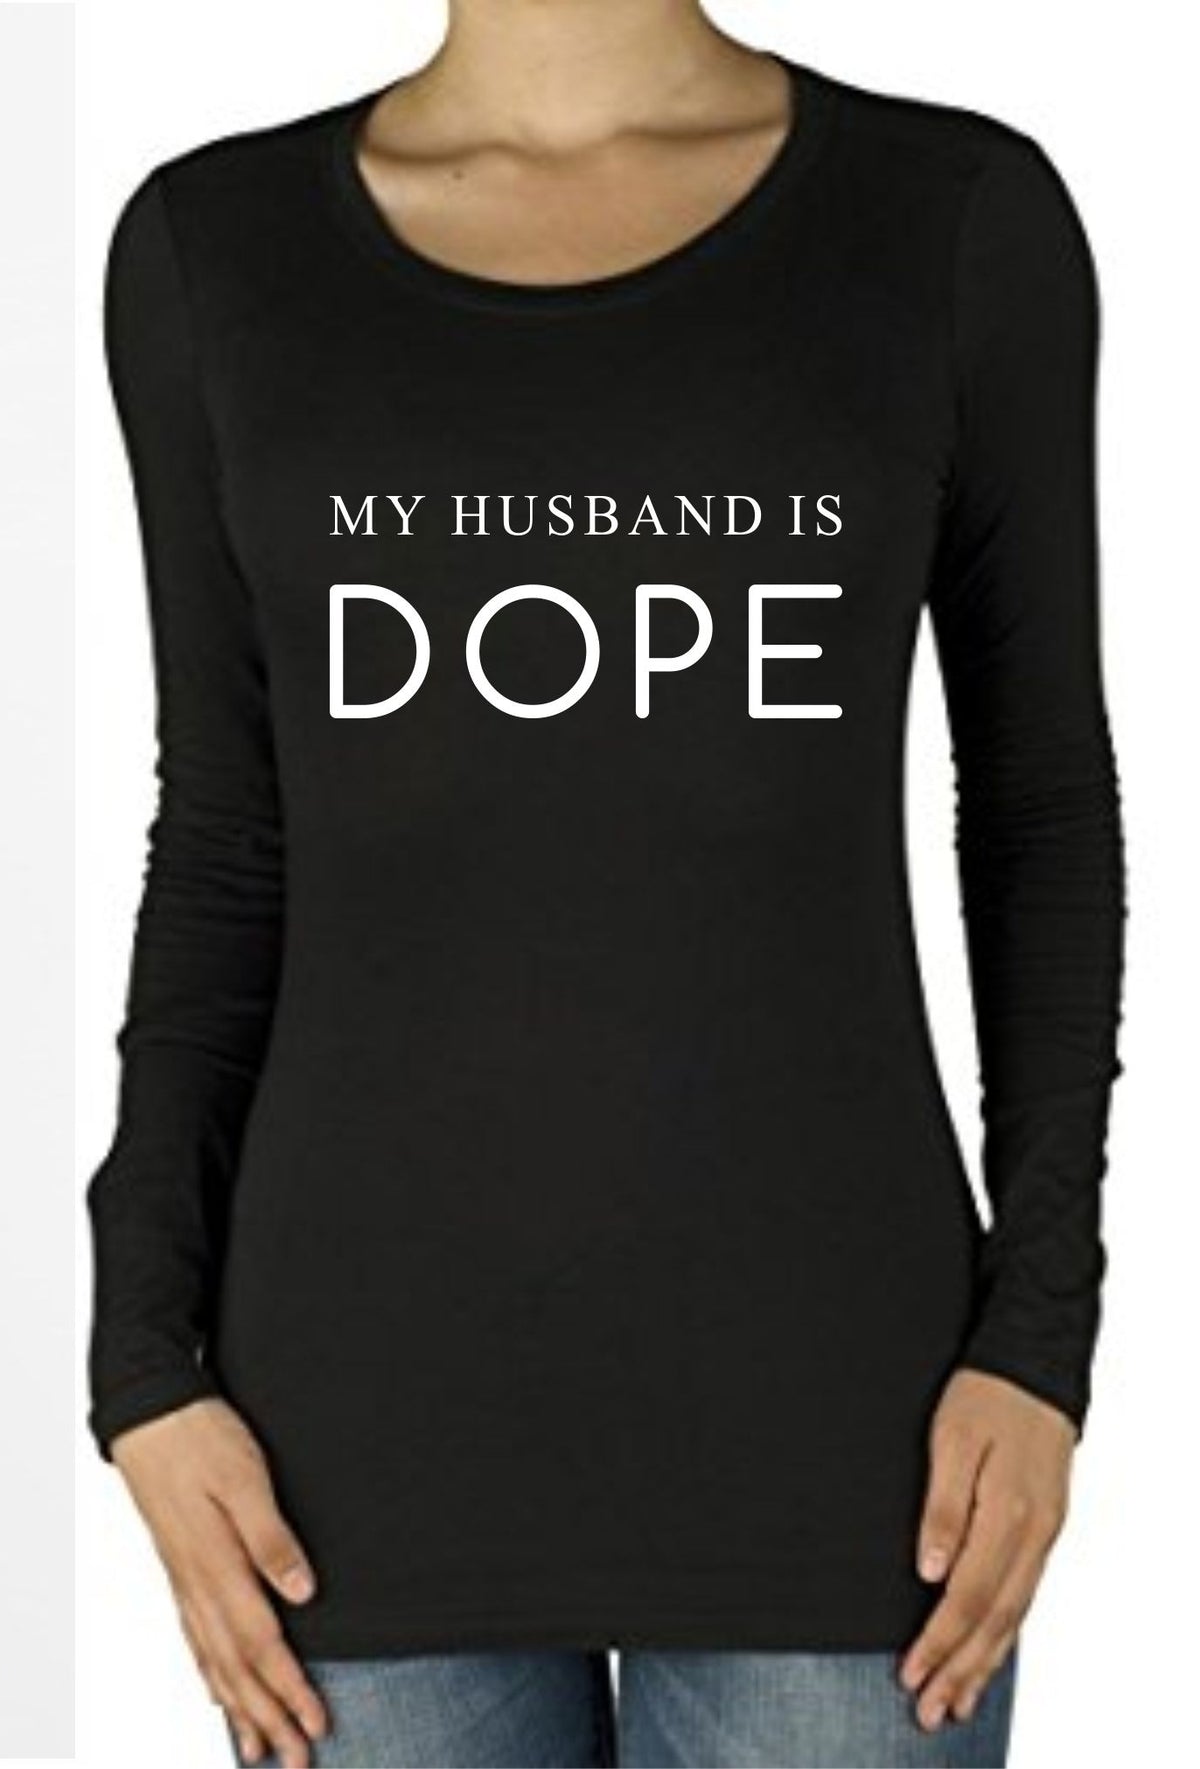 My Husband Is Dope (Long Sleeve Fitted)